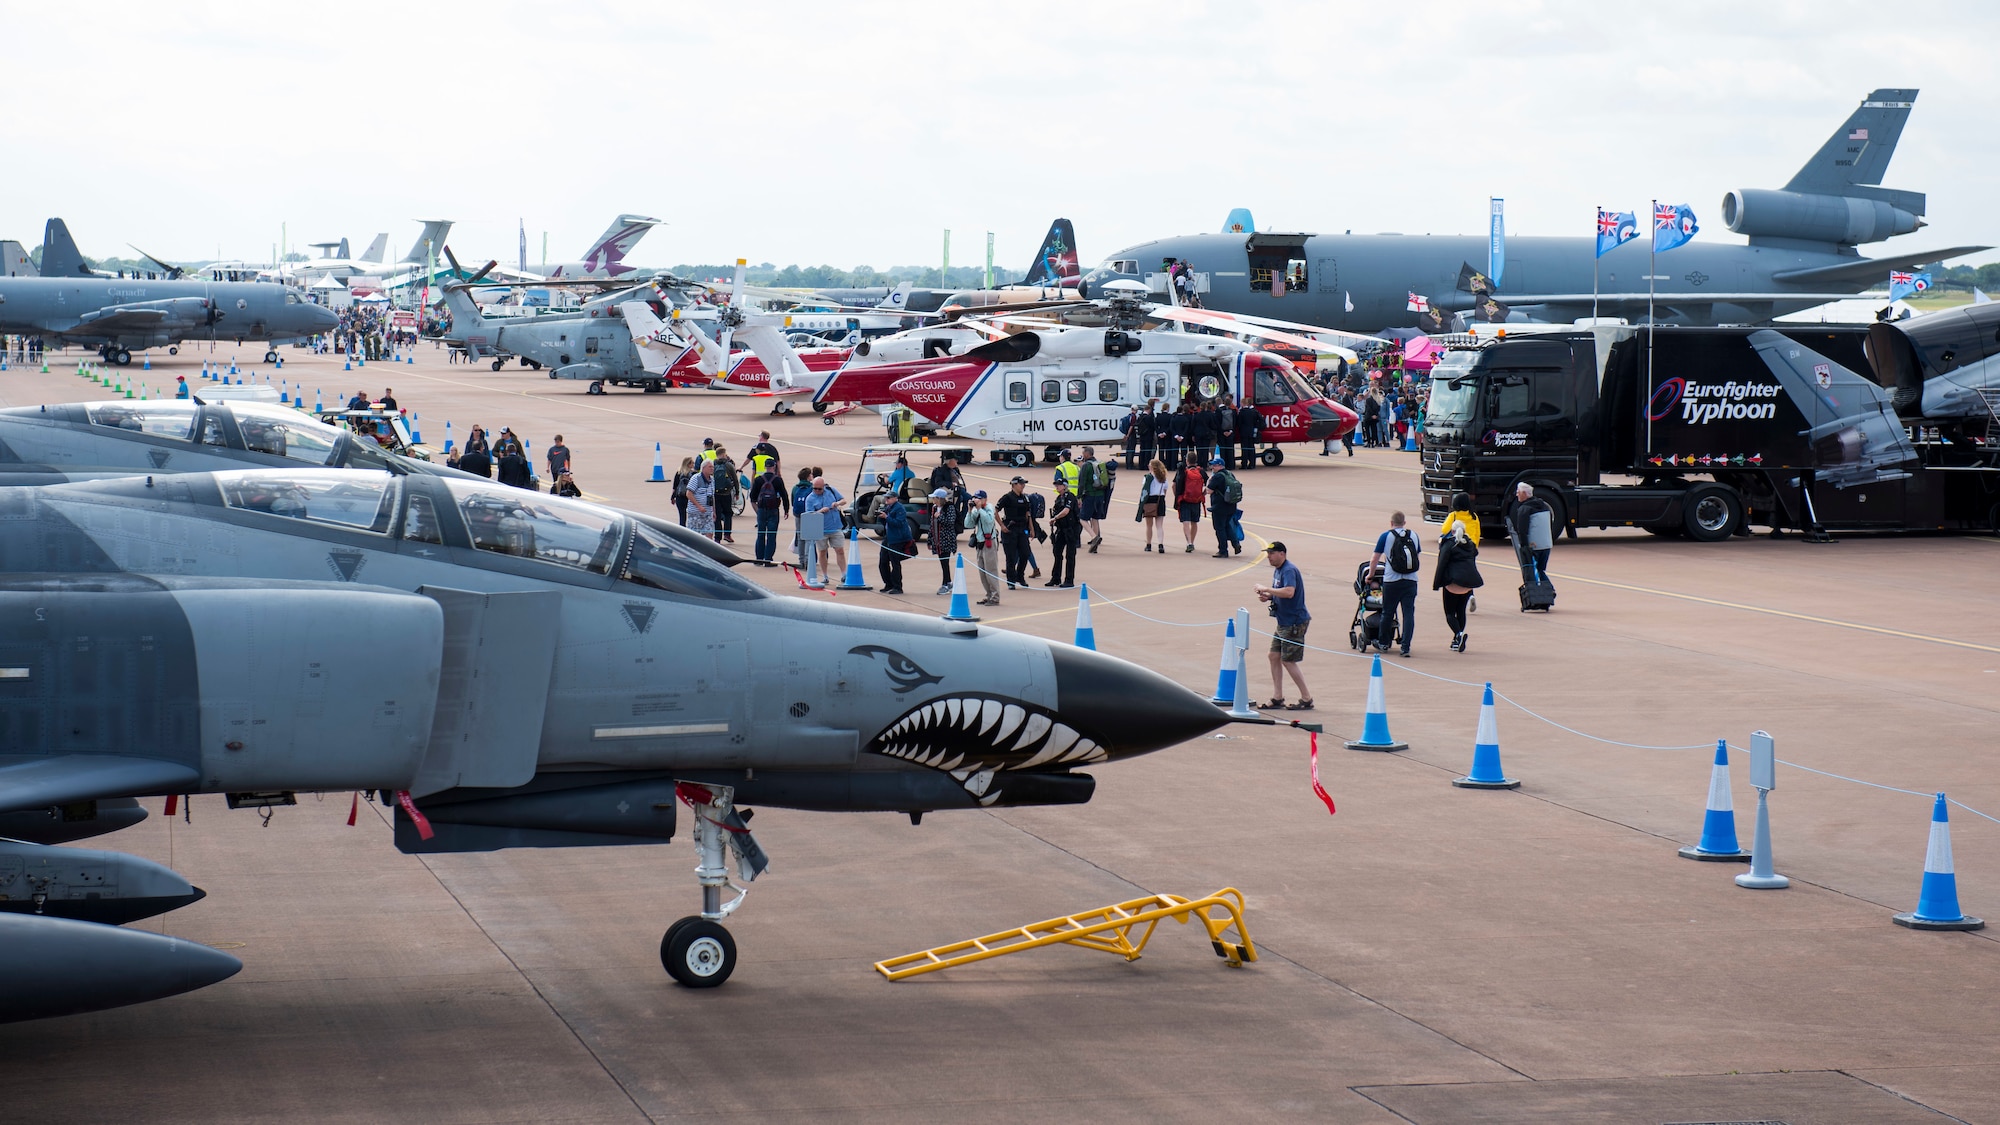 Thousands of attendees view static displays of NATO aircraft during the 2019 Royal International Air Tattoo at RAF Fairford, England, July 20, 2019. This year’s RIAT commemorated the 70th Anniversary of NATO and highlighted the United State’s enduring commitment to its European allies. (U.S. Air Force photo by Airman 1st Class Jennifer Zima)